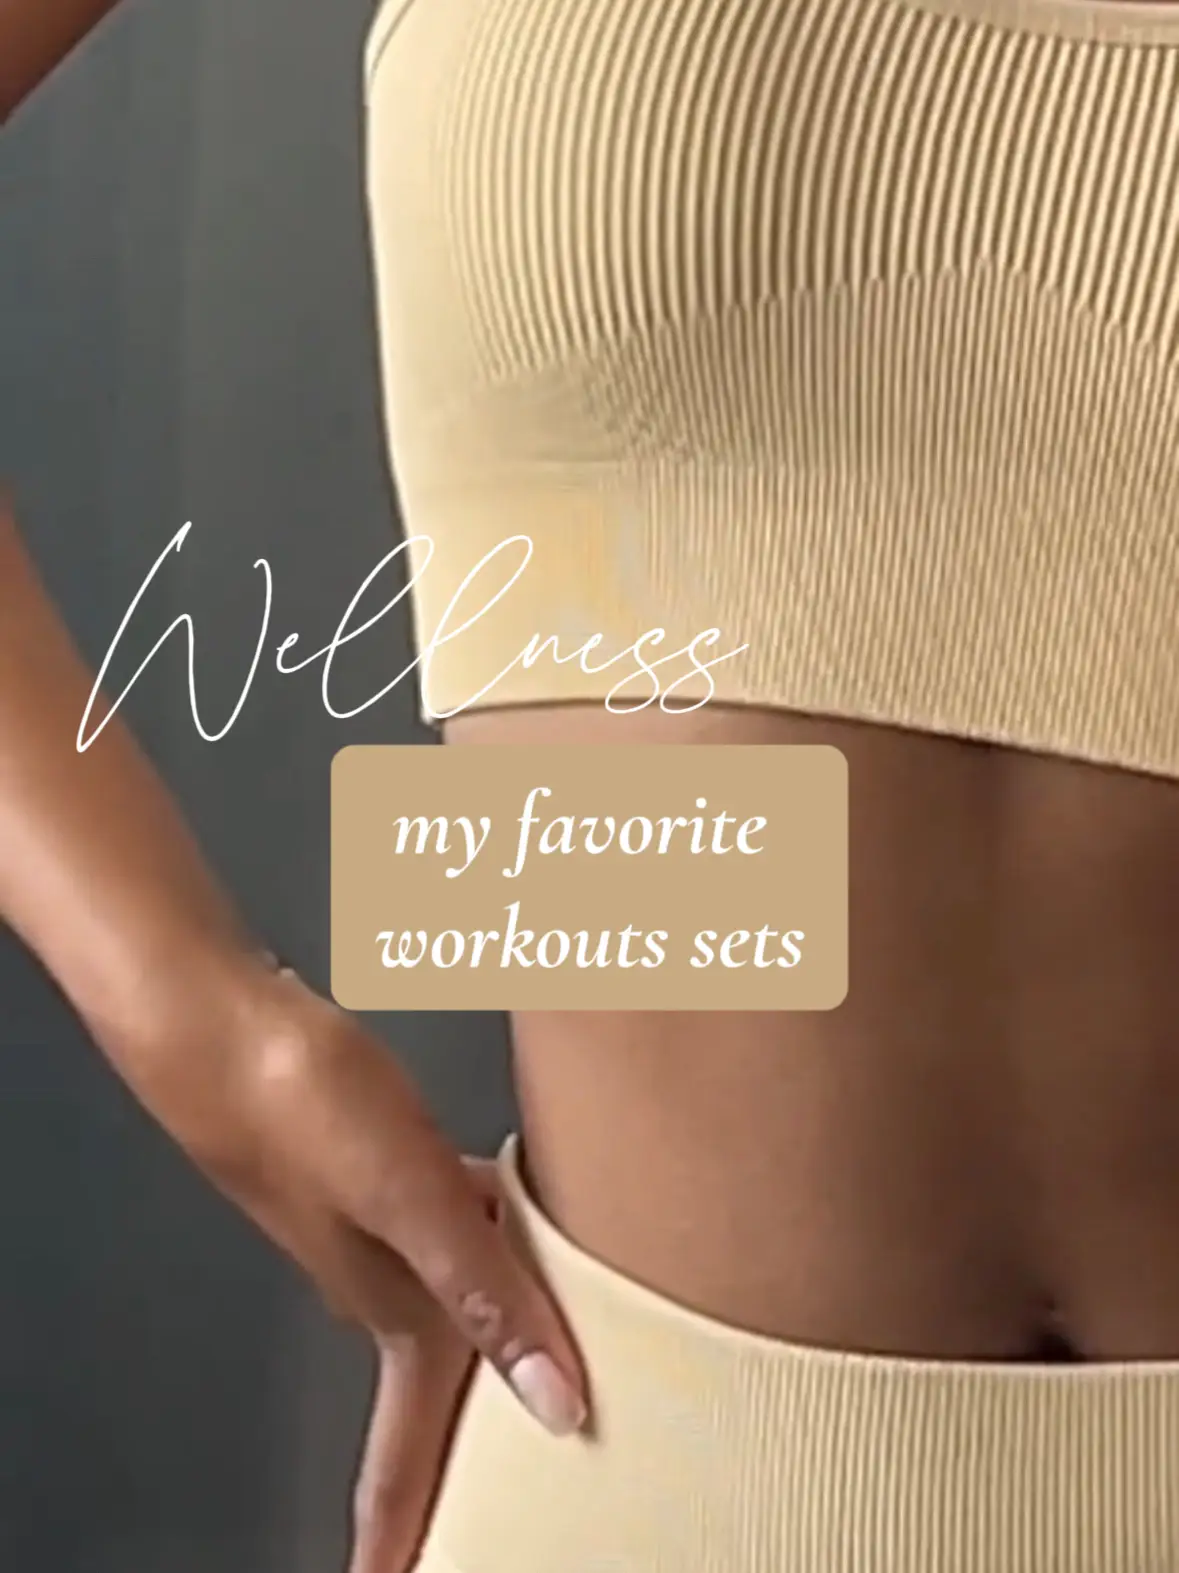 My favorite workout sets!, Gallery posted by Amora ✨🌙